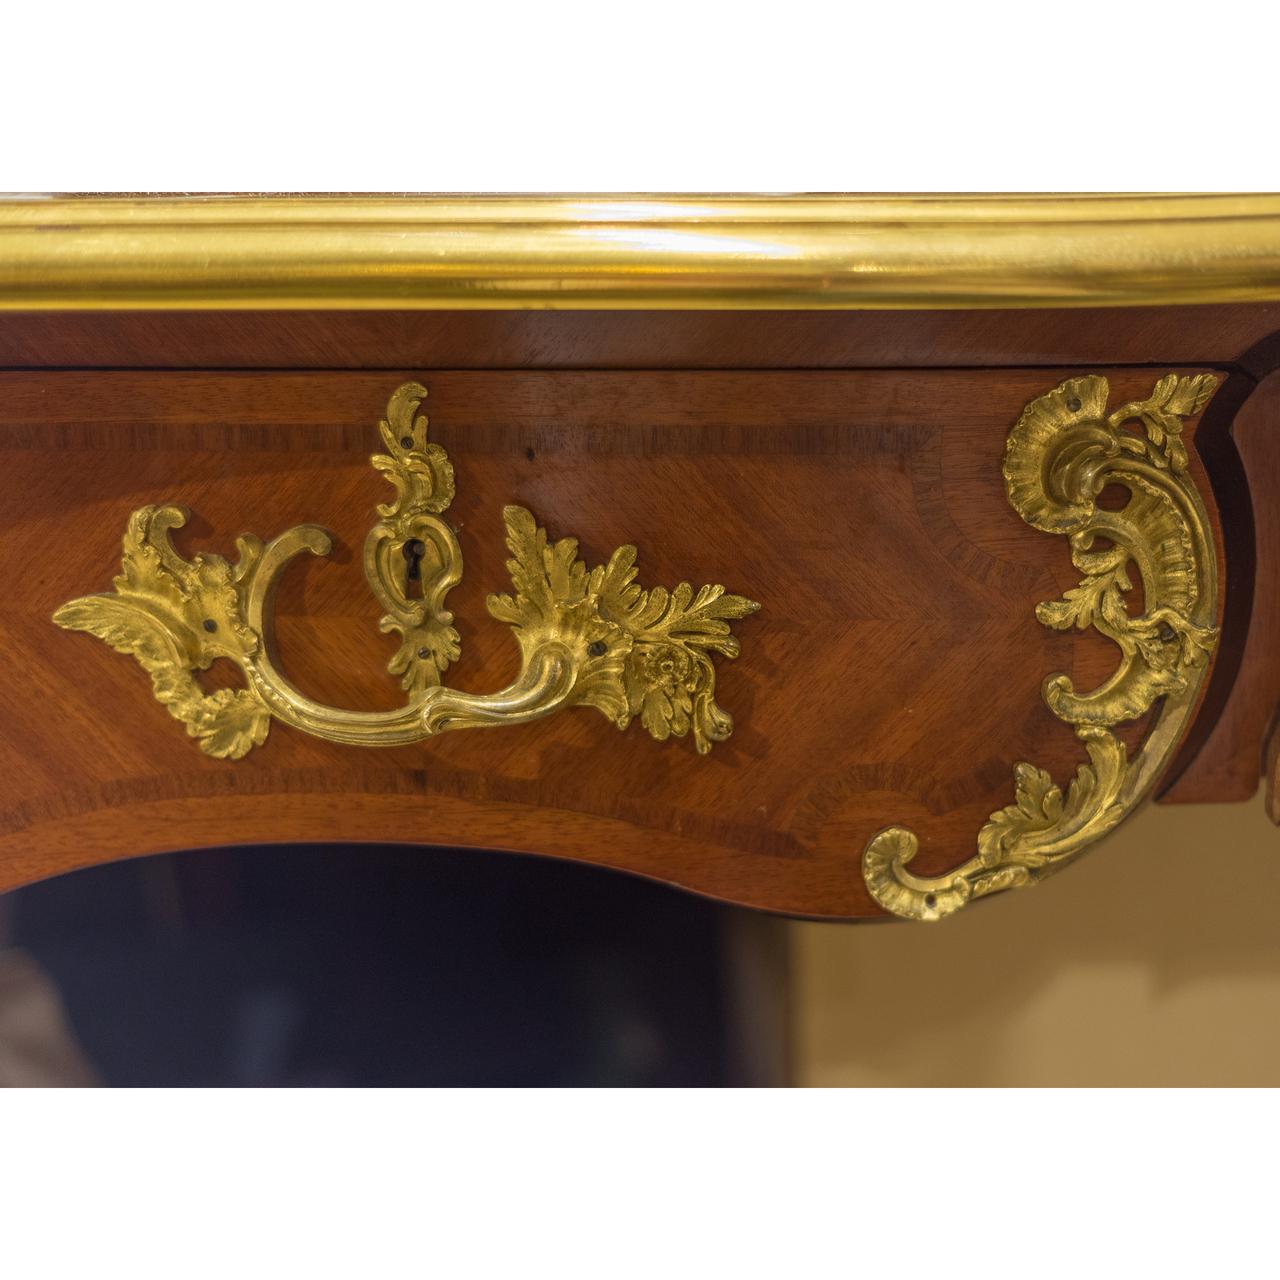 A fabulous quality 19th century ormolu-mounted bureau by Maison Krieger.
Serpentine top with brown leather writing surface, the frieze set with three drawers, the reverse with false drawers, the interior of one drawer with plaquette engraved